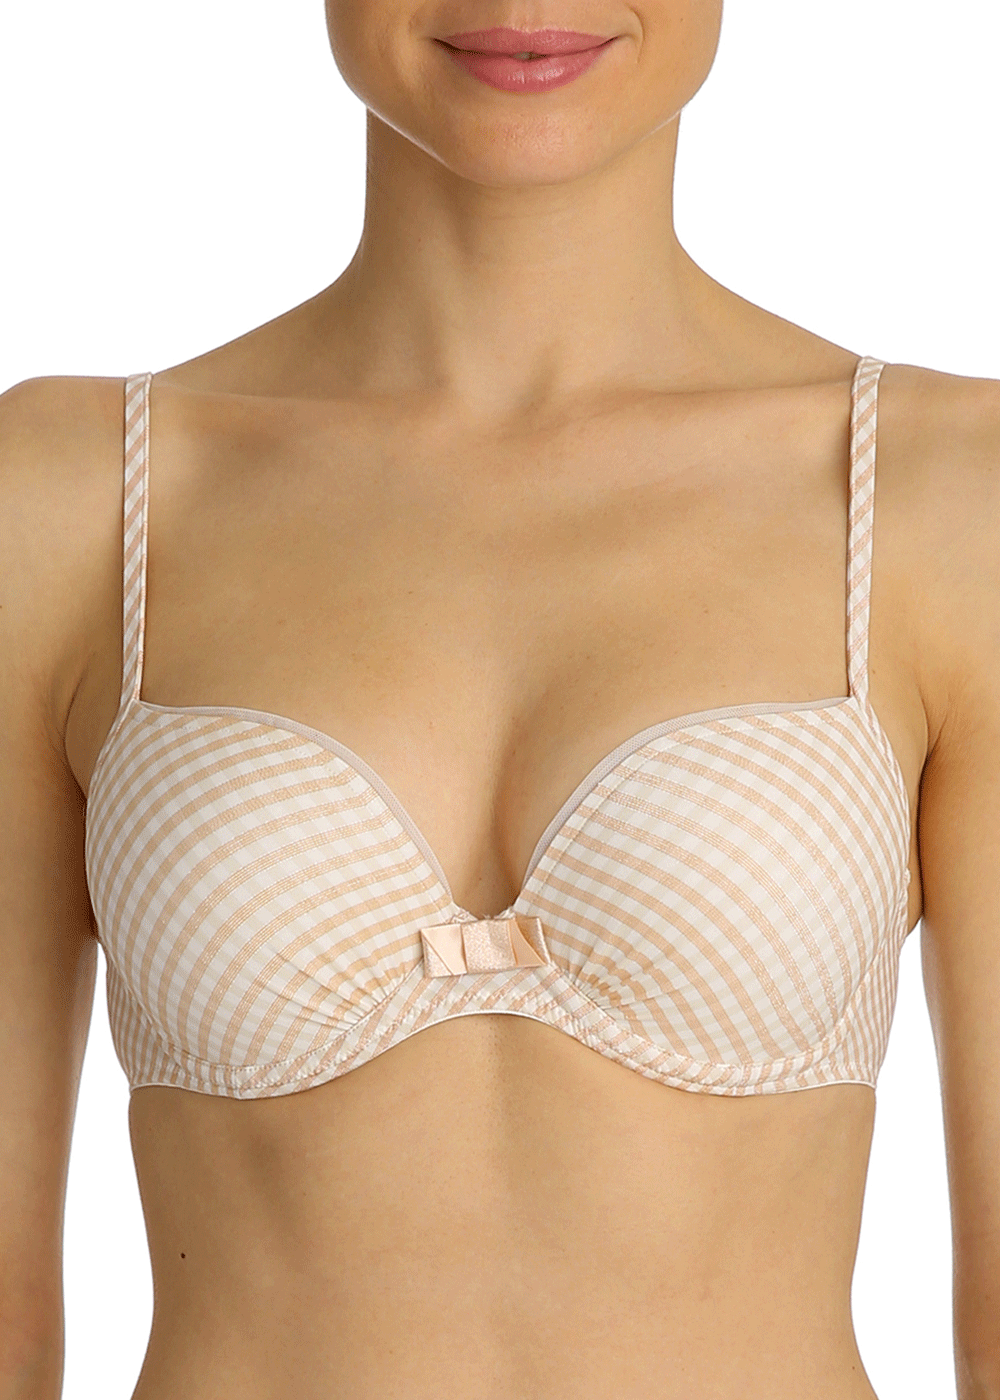 Soutien-gorge Push-Up Marie Jo l'Aventure Pearly Skin